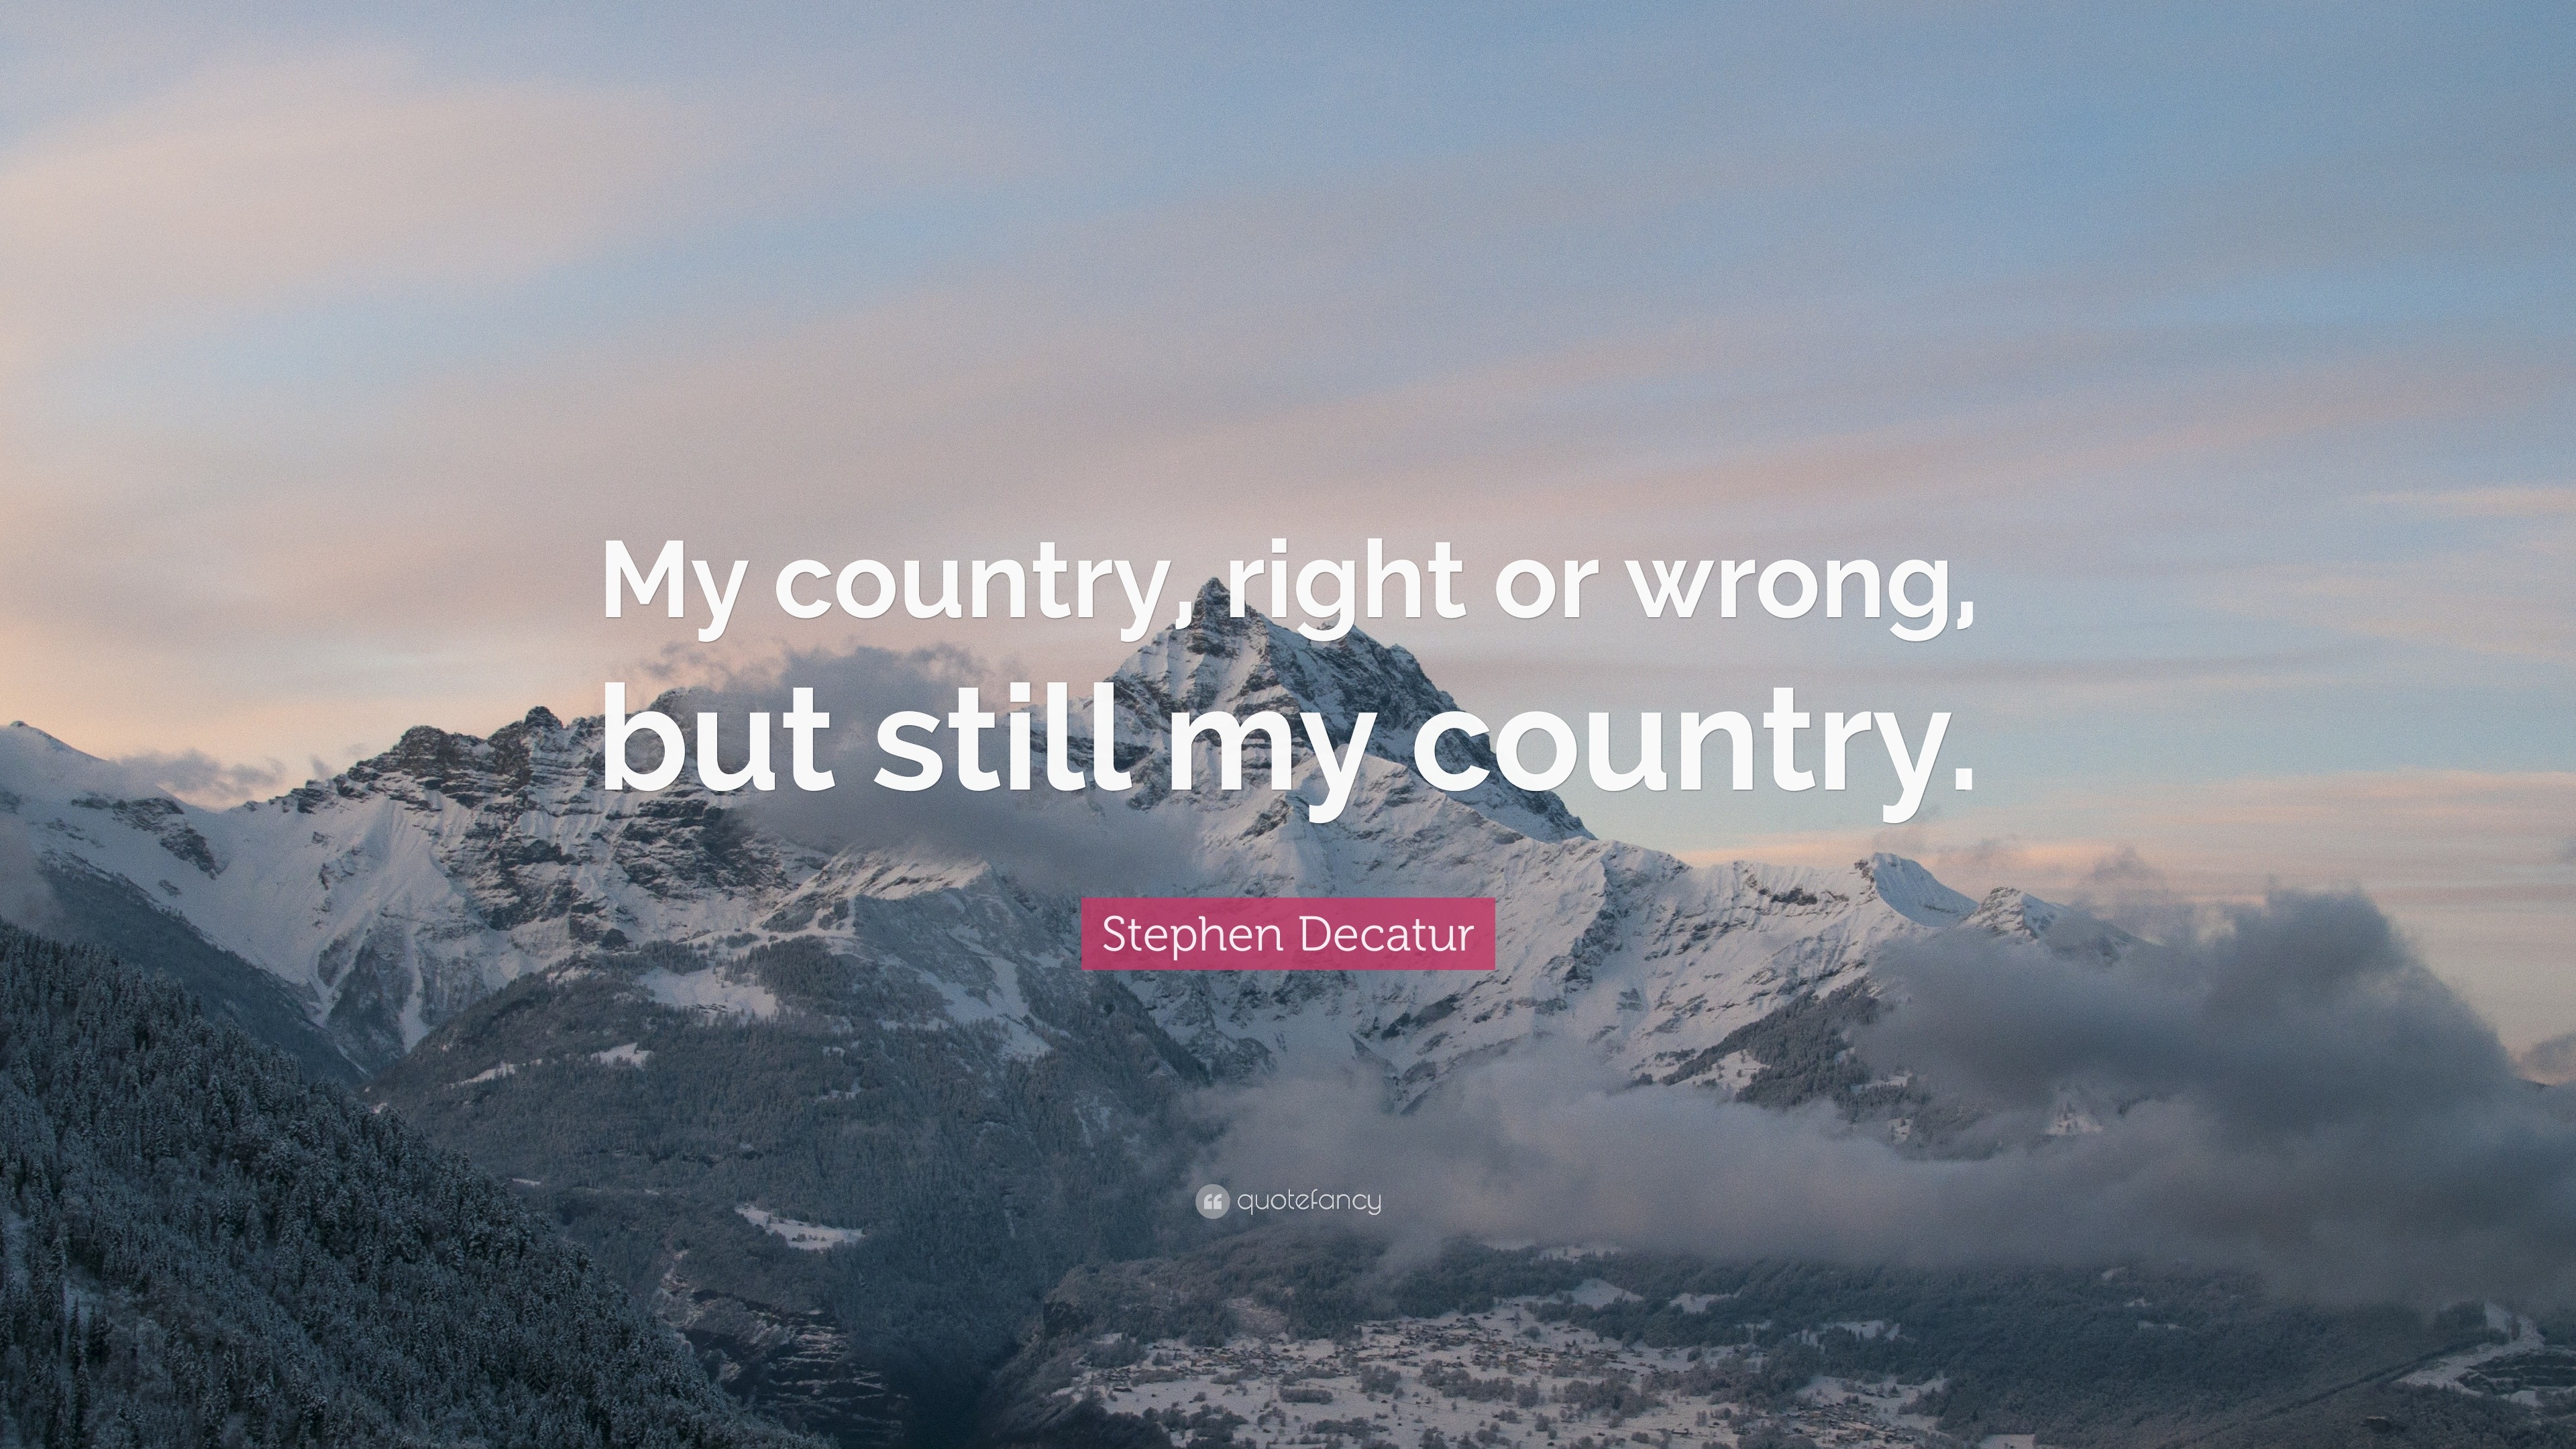 Stephen Decatur Quote: “My country, right or wrong, but still my country.”